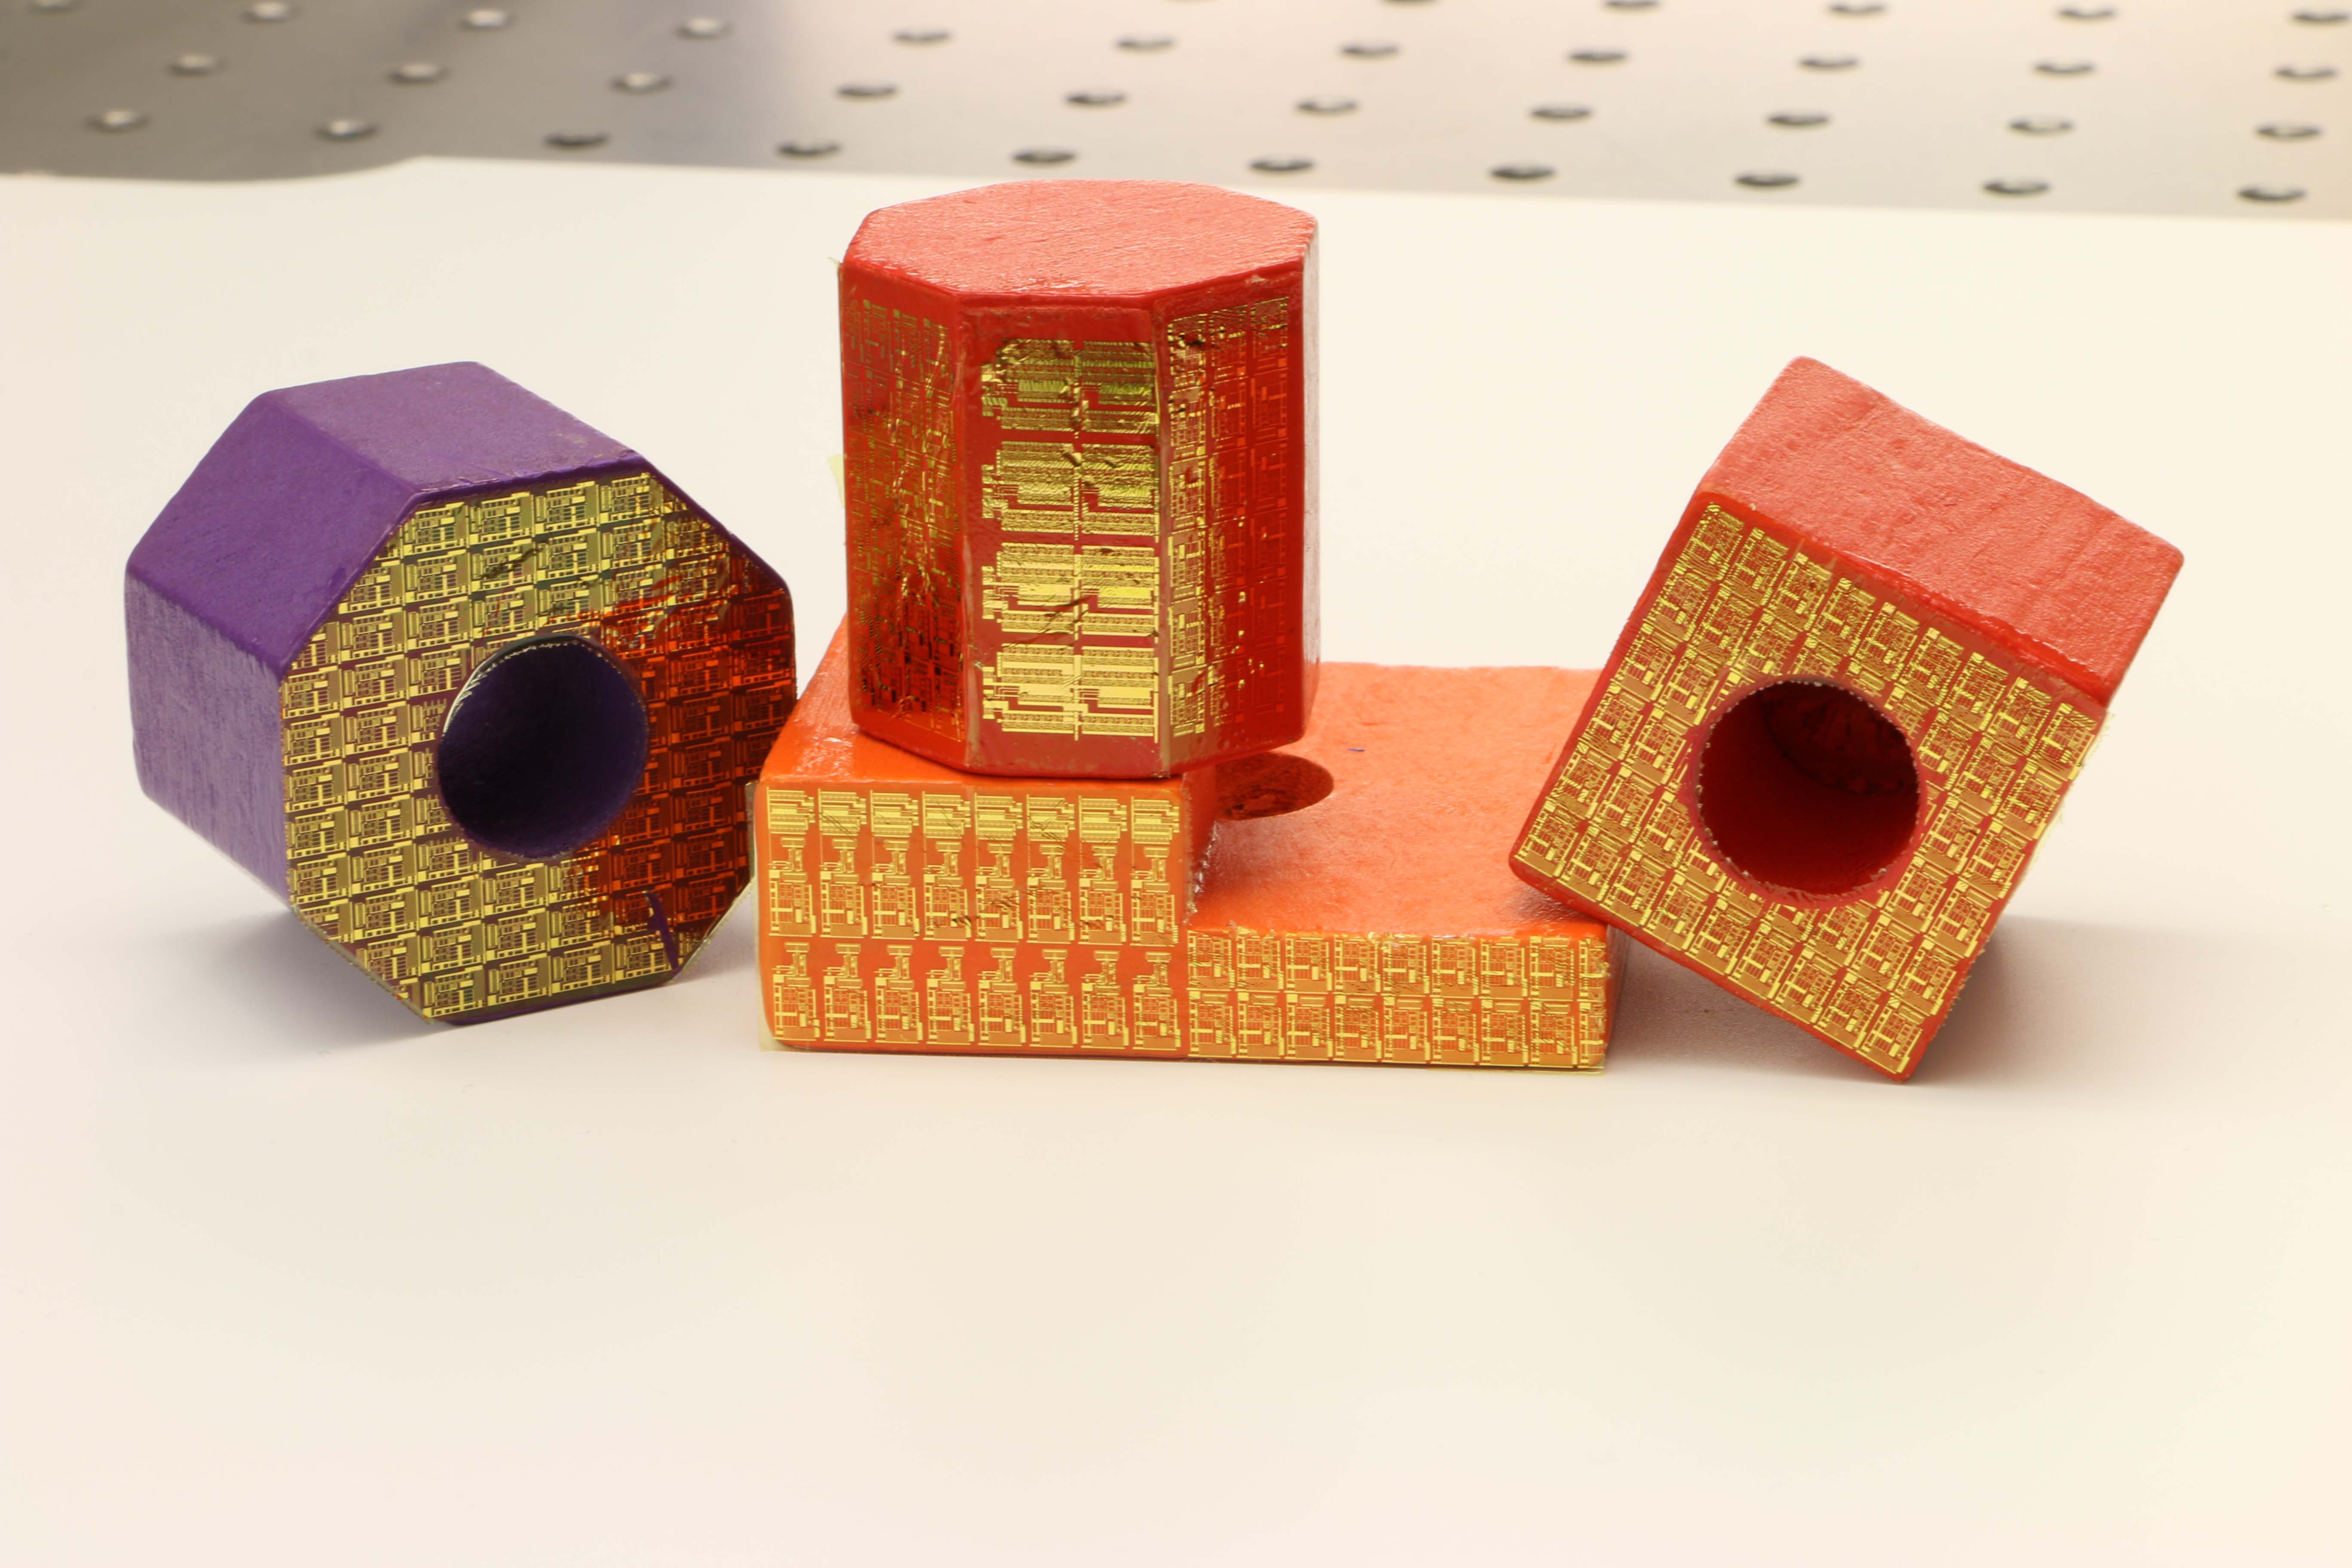 Electronic stickers can turn ordinary toy blocks into high-tech sensors within the ‘Internet of Things.’ (Purdue University image/Chi Hwan Lee)